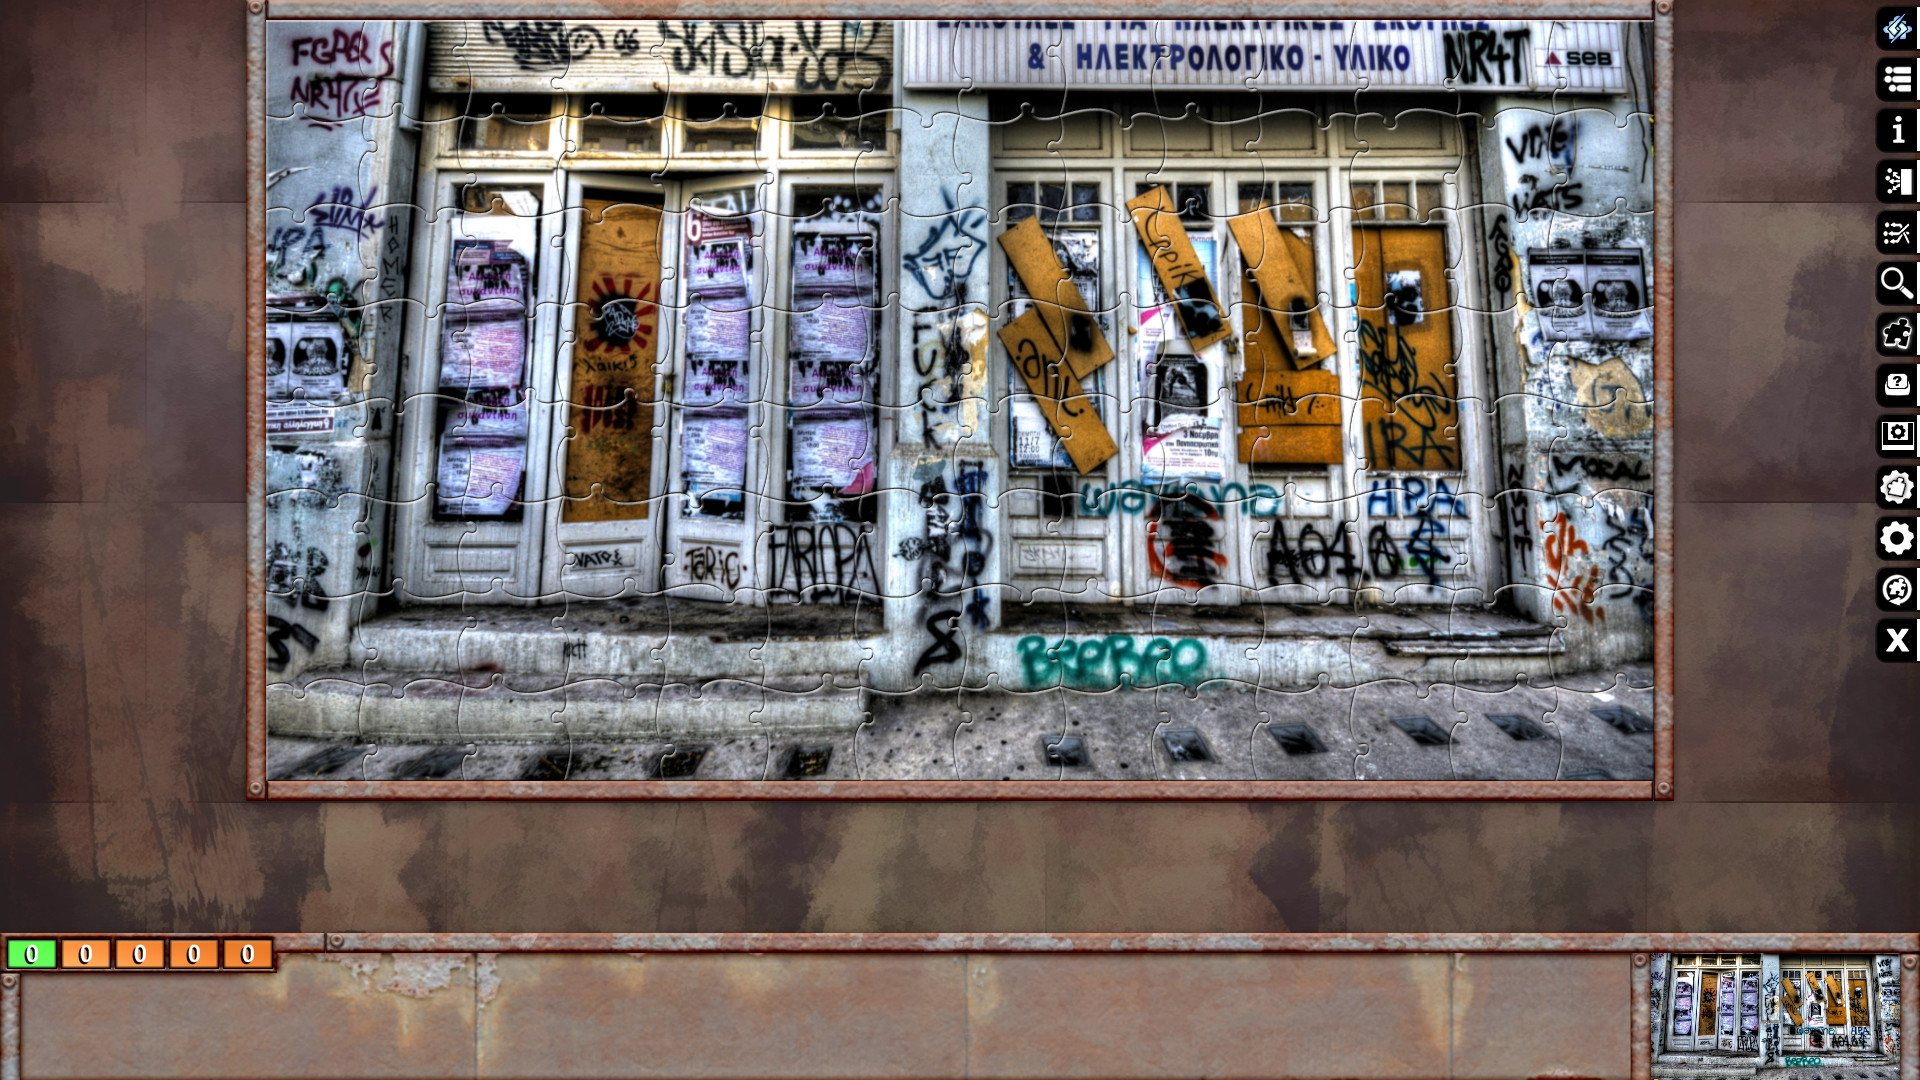 Jigsaw Puzzle Pack - Pixel Puzzles Ultimate: Urban Decay screenshot